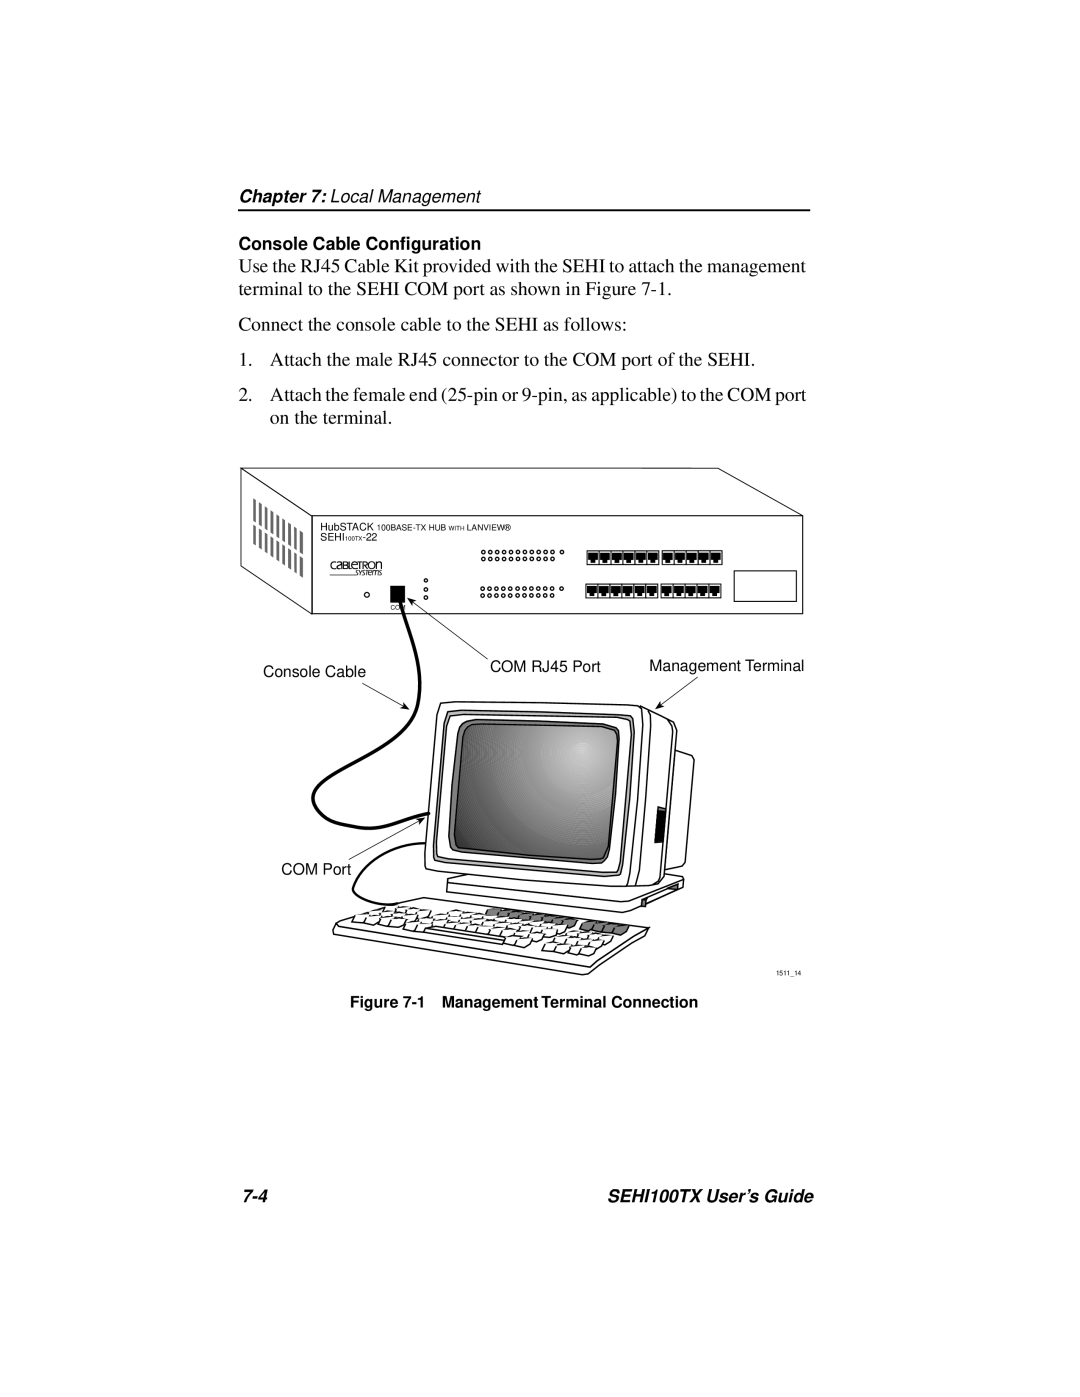 Cabletron Systems SEHI100TX-22 manual Connect the console cable to the SEHI as follows 